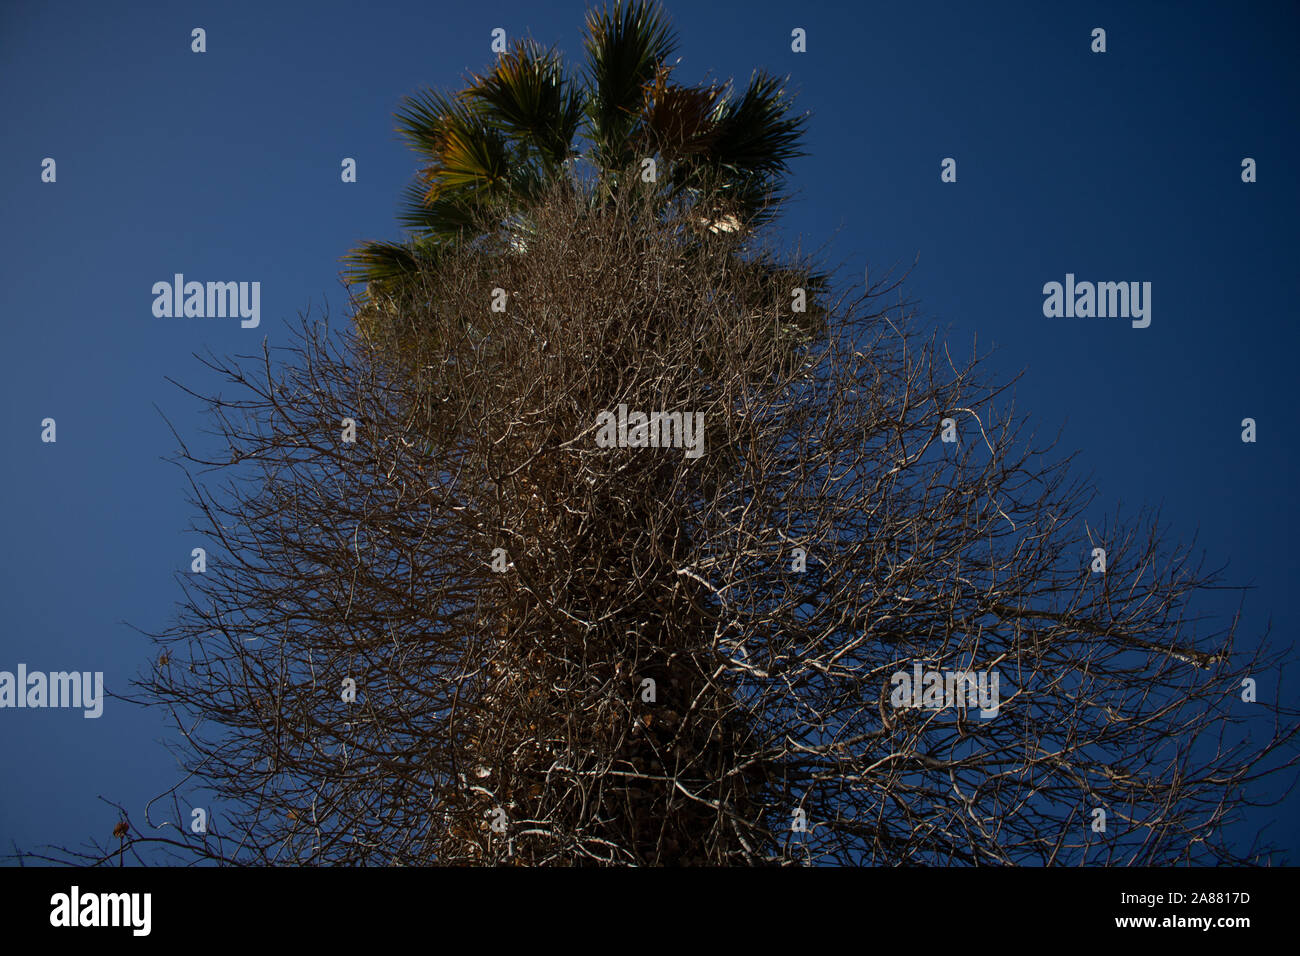 Victoria gardens rancho cucamonga hi-res stock photography and images -  Alamy